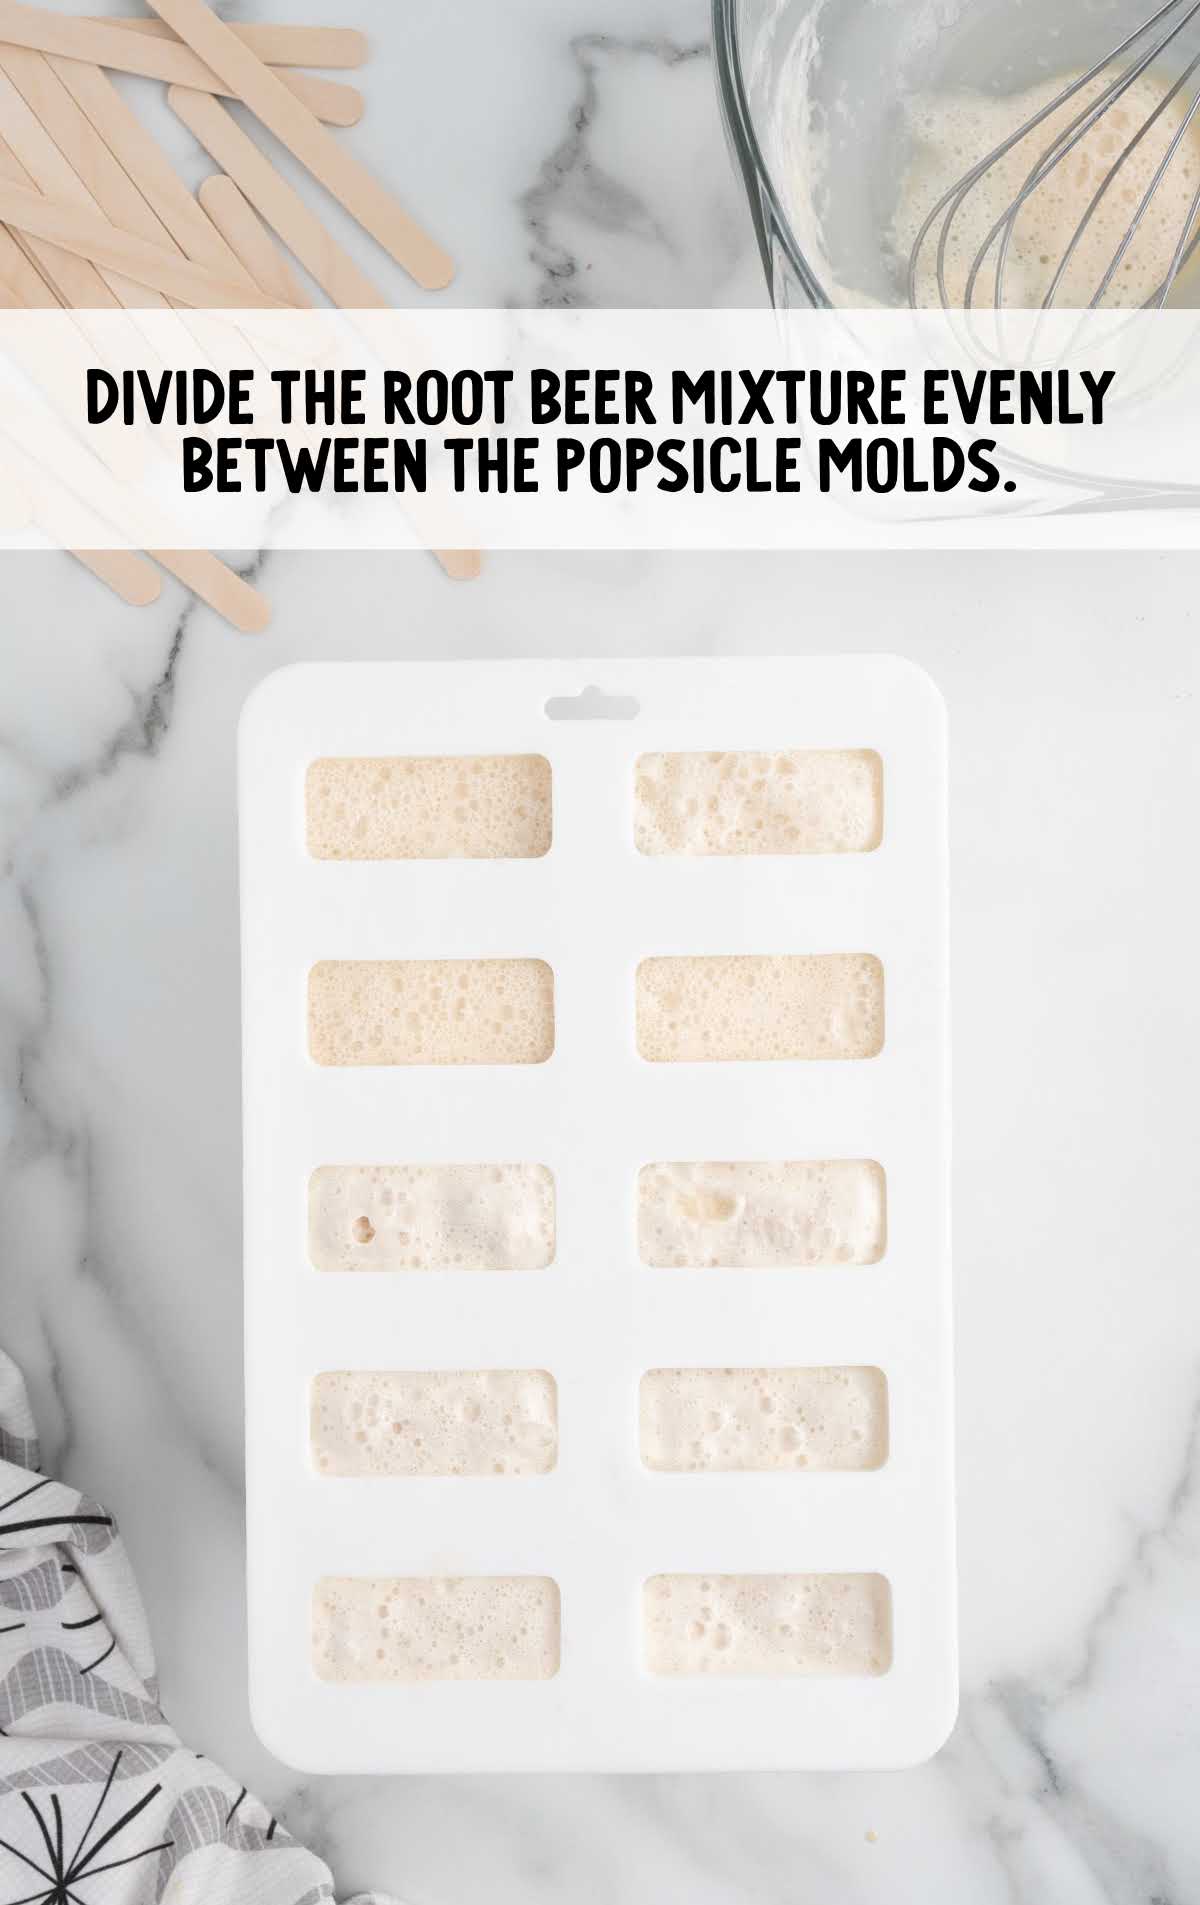 root beer mixture divided between the popsicle molds